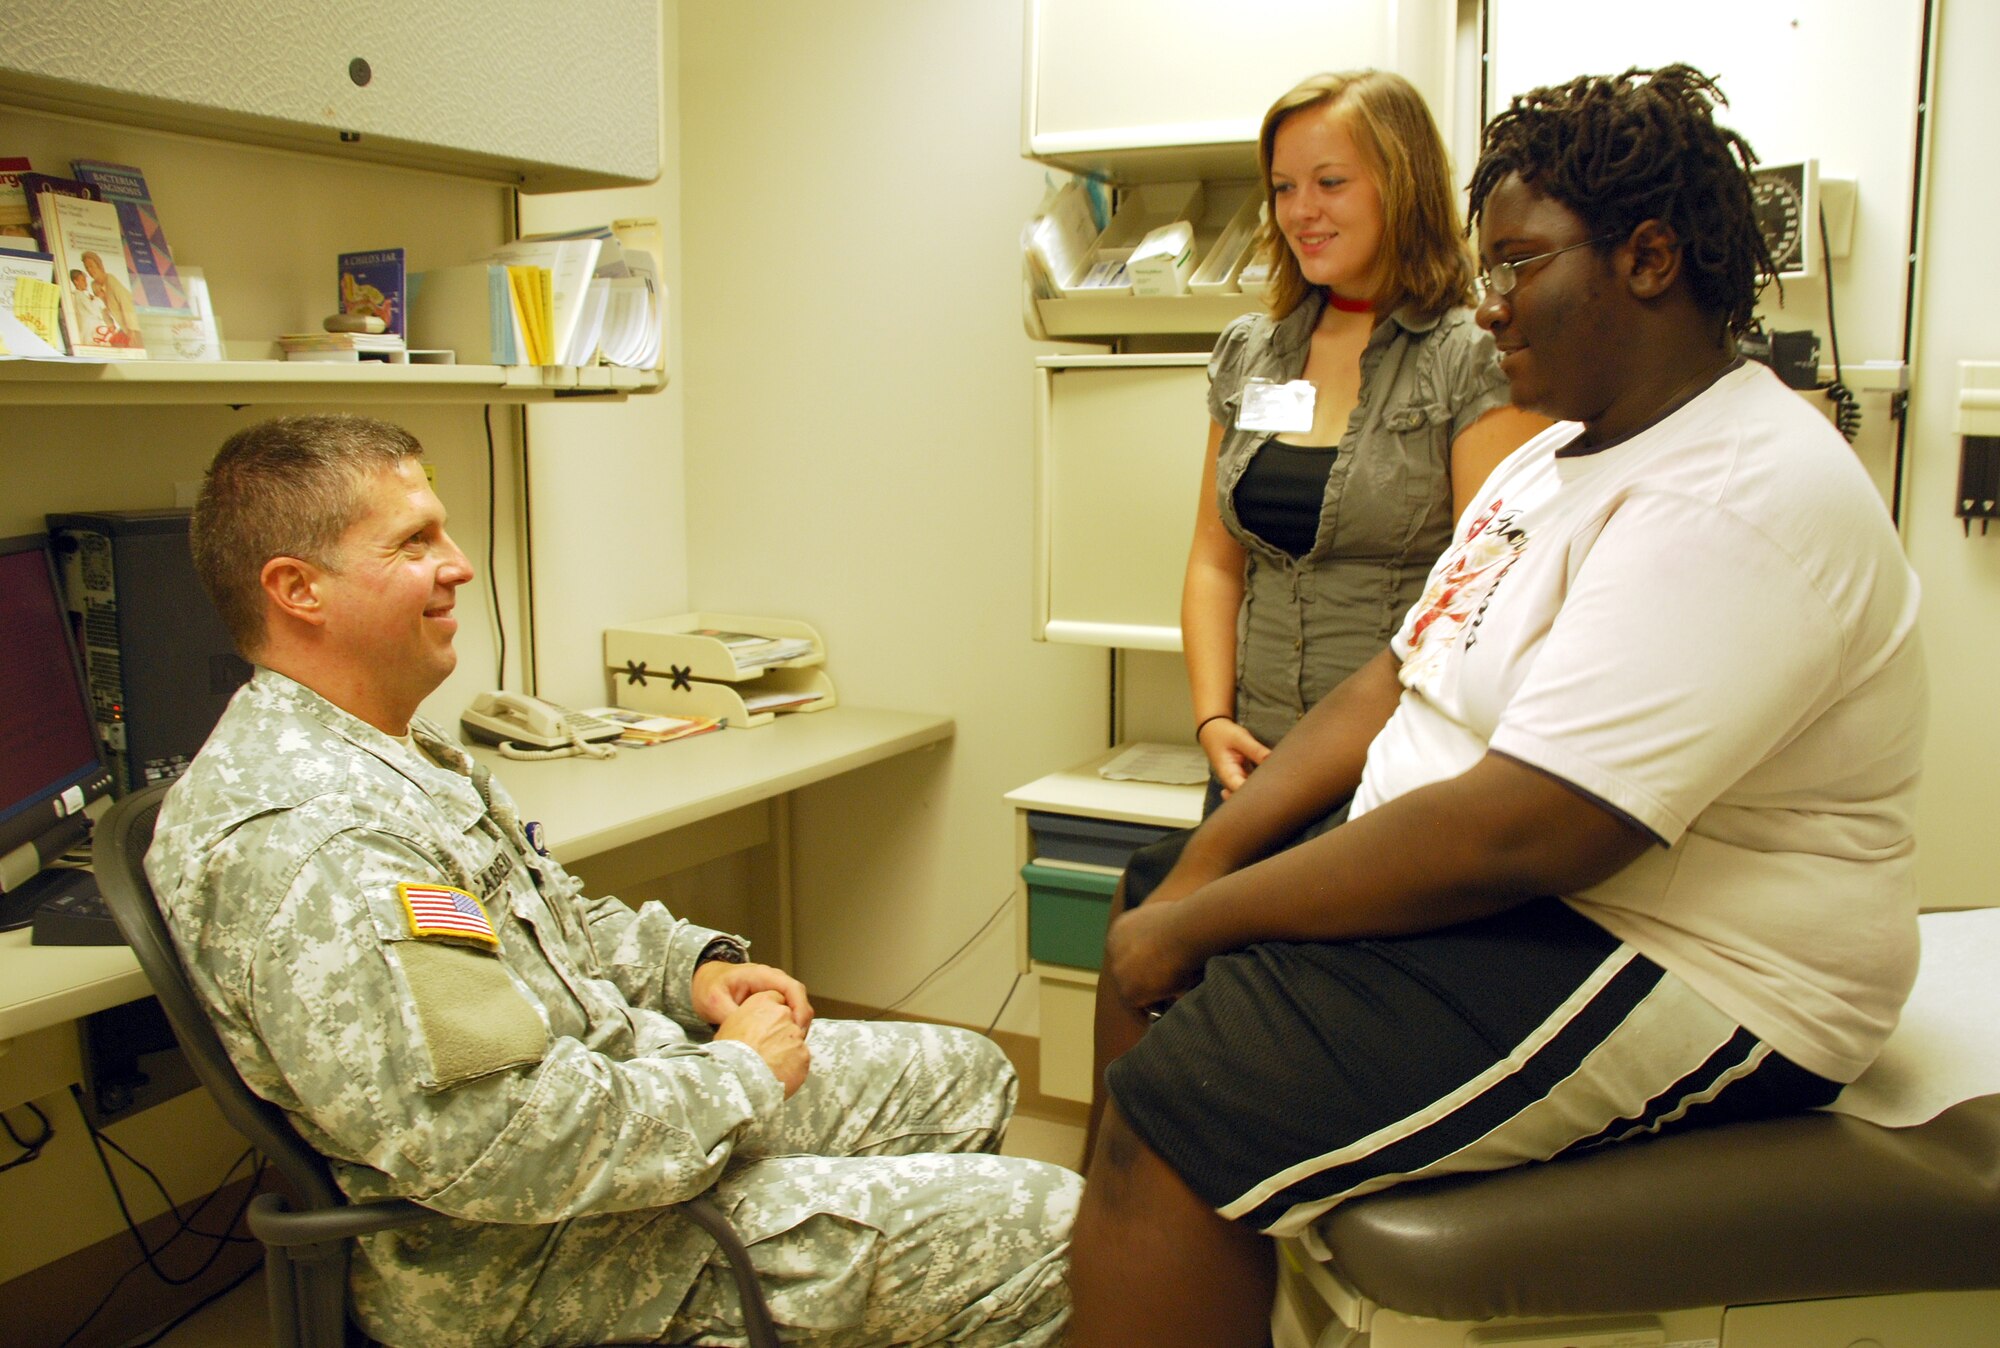 Principal Investigator, Maj. Jorge Cabrera, Department of Clinical Investigations with Brooke Army Medical Center converses with  Kaitlin Sheridan and Lyynel Reed Washington about their progress in the research. The goal of the research is to reach 100 volunteers to participate in this research. (U.S. Army photo)